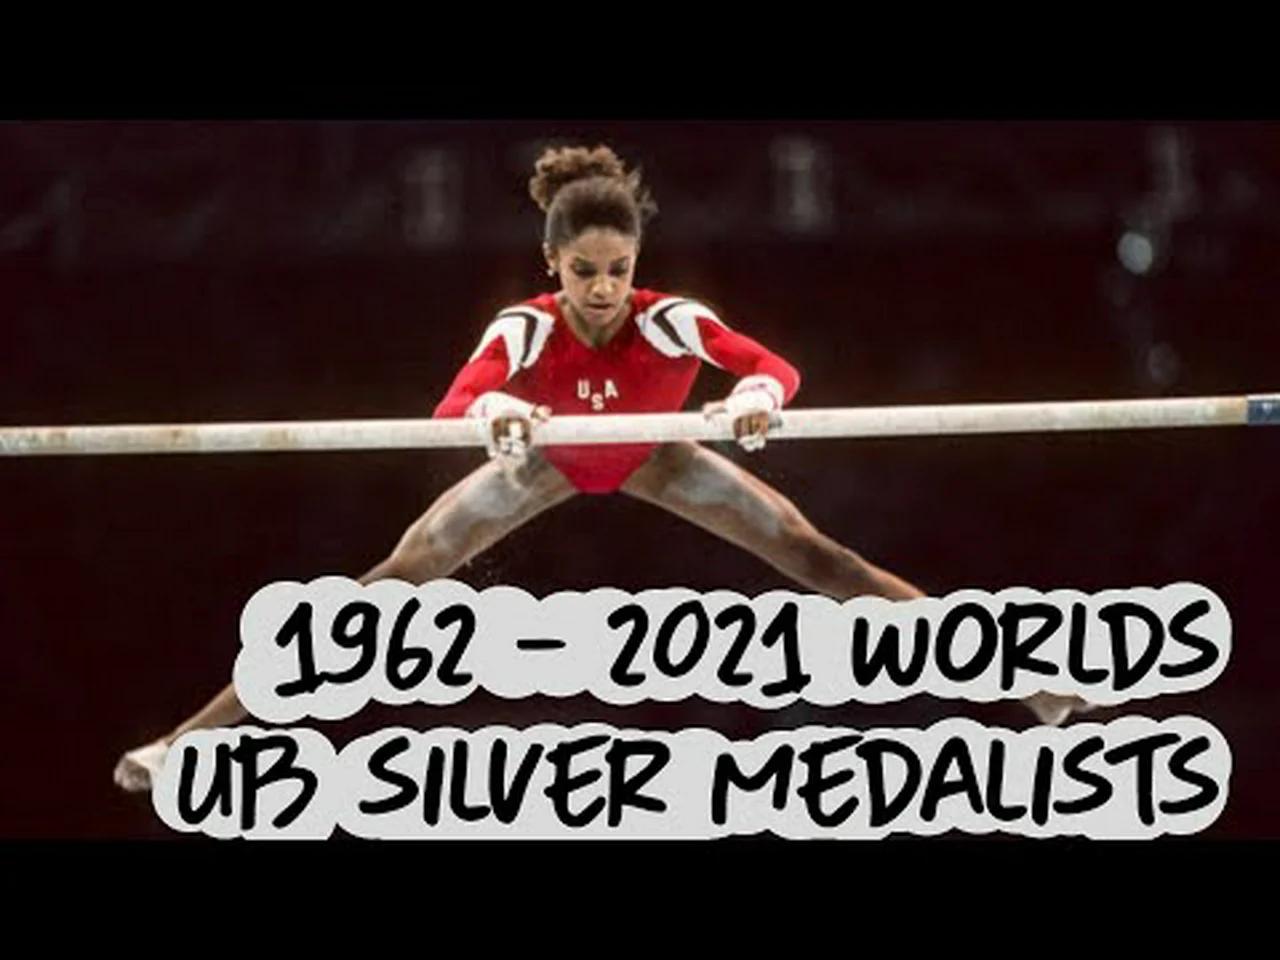 all-uneven-bars-silver-medalists-gymnastics-world-championships-1962-2021